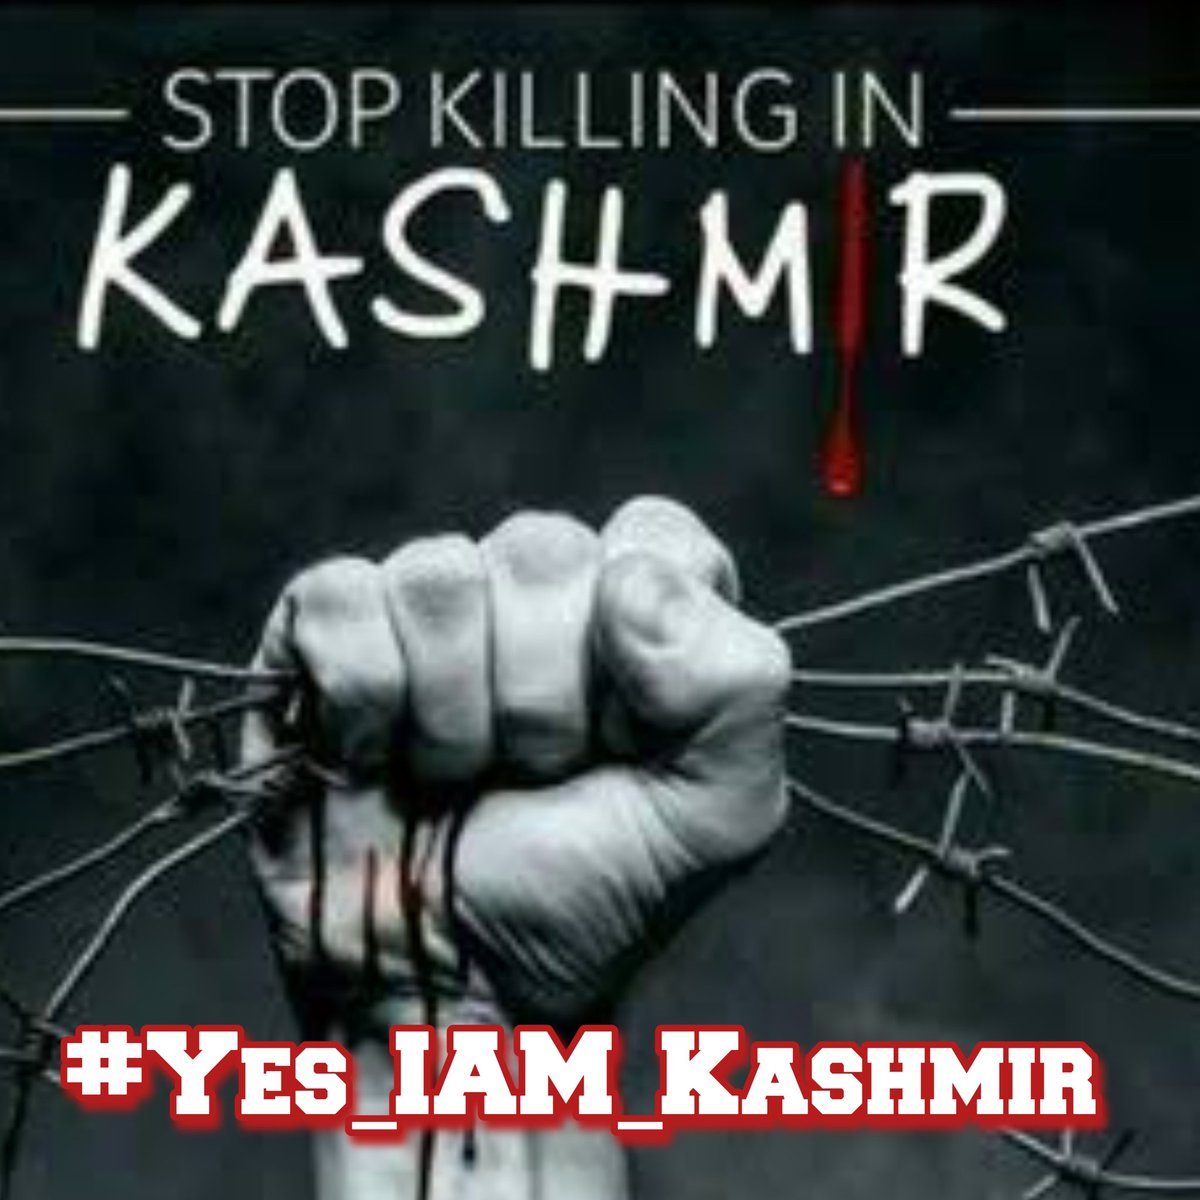 “It is the voice of every Kashmiri:
We exist
Our voices may be small 
But we exist
Our ary might not be political
But we exist
Our opinion might be ignores 
But we exist.”
 
Our hope Kashmir will free one day insha'Allah ❤️

#Yes_IAM_Kashmir